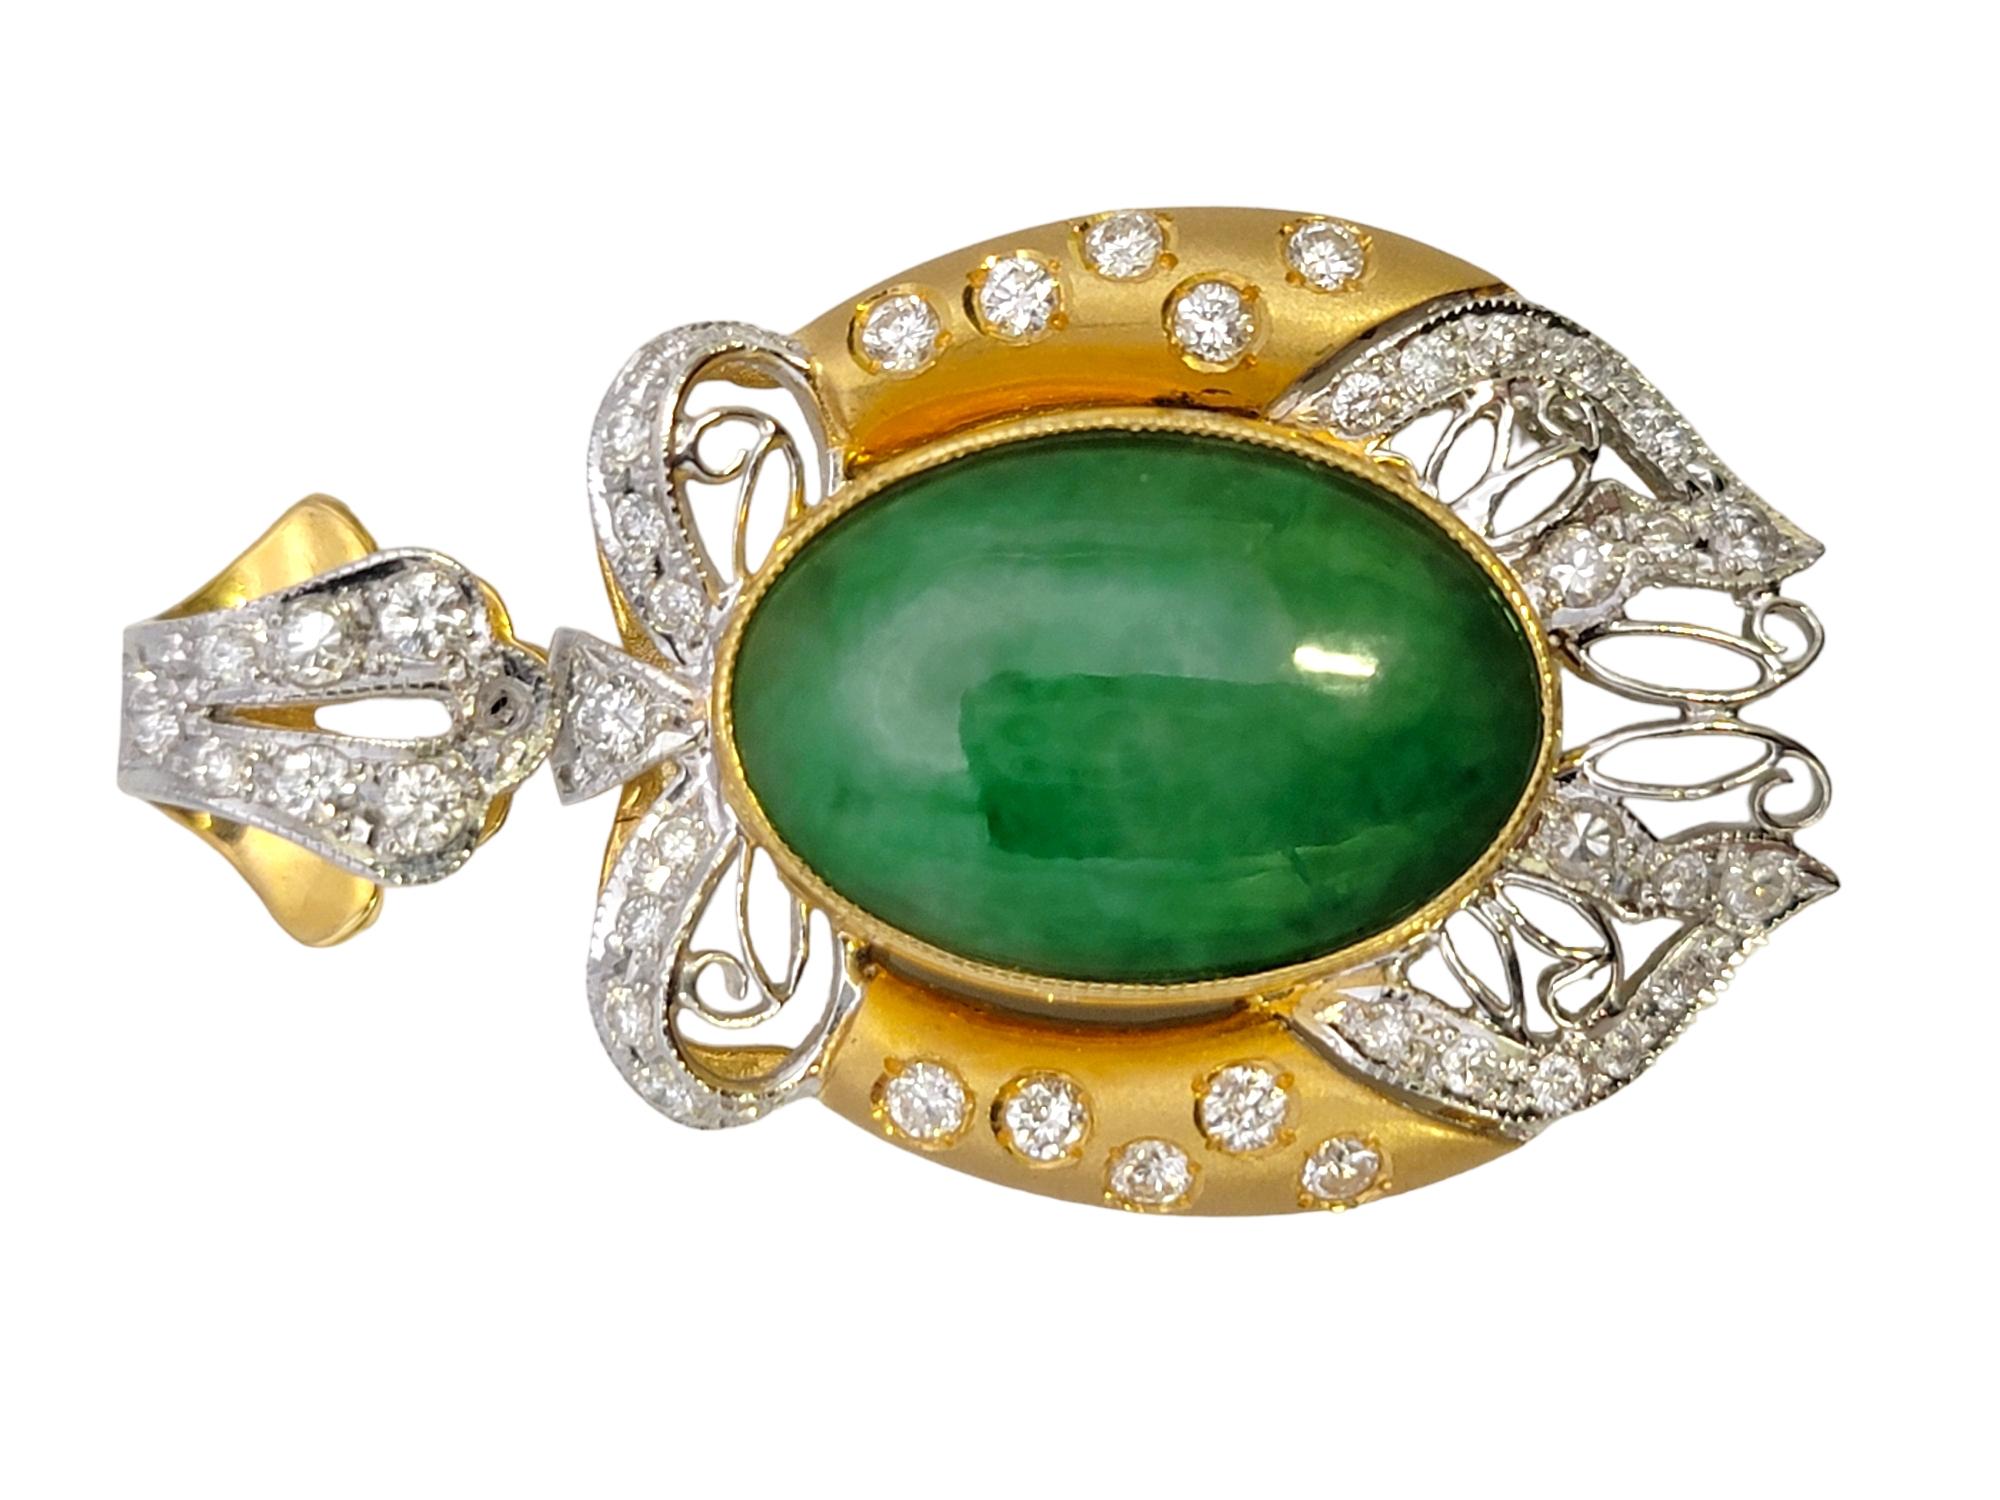 Intricately designed jade and diamond pendant with a gorgeous bow and filigree design. The sizeable pendant sparkles beautifully in the light while the bright green jade radiates among the elaborate setting. 

This lovely pendant features a single